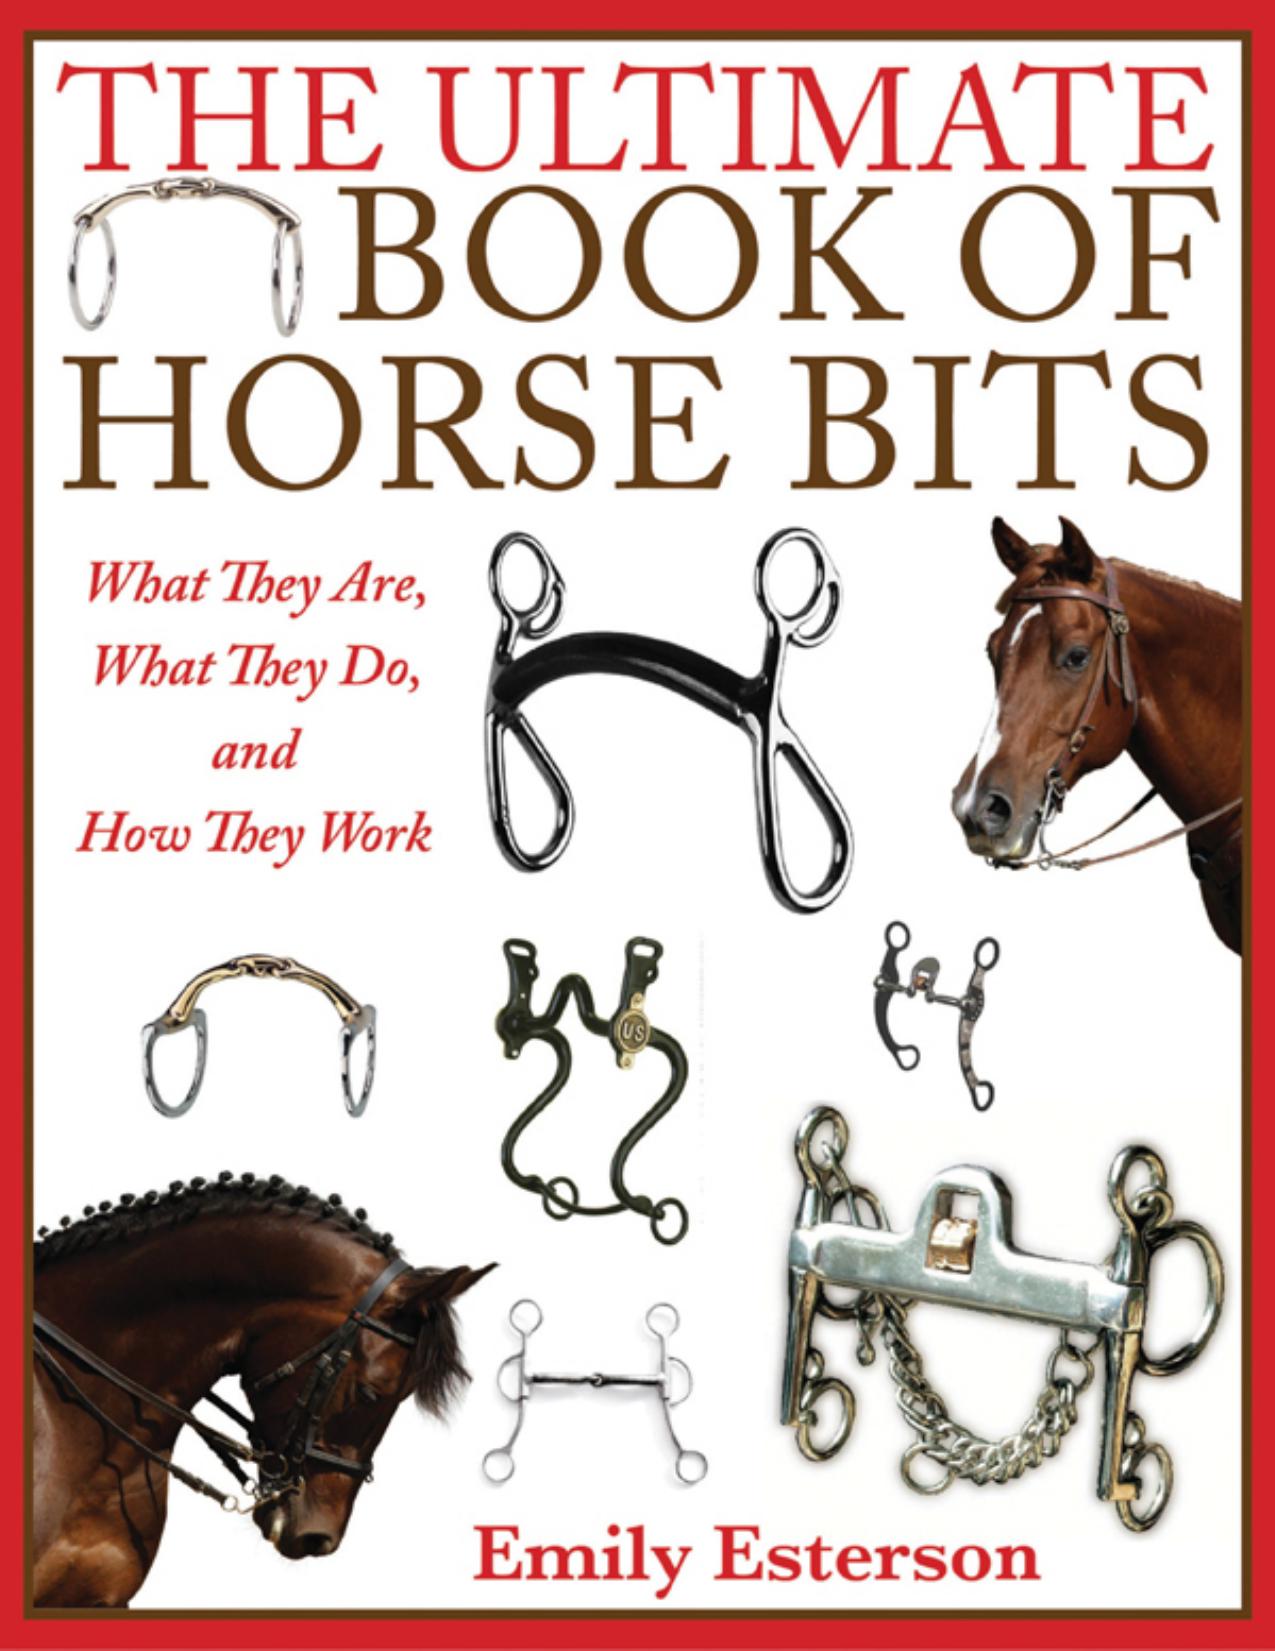 The Ultimate Book of Horse Bits: What They Are, What They Do, and How They Work by Emily Esterson